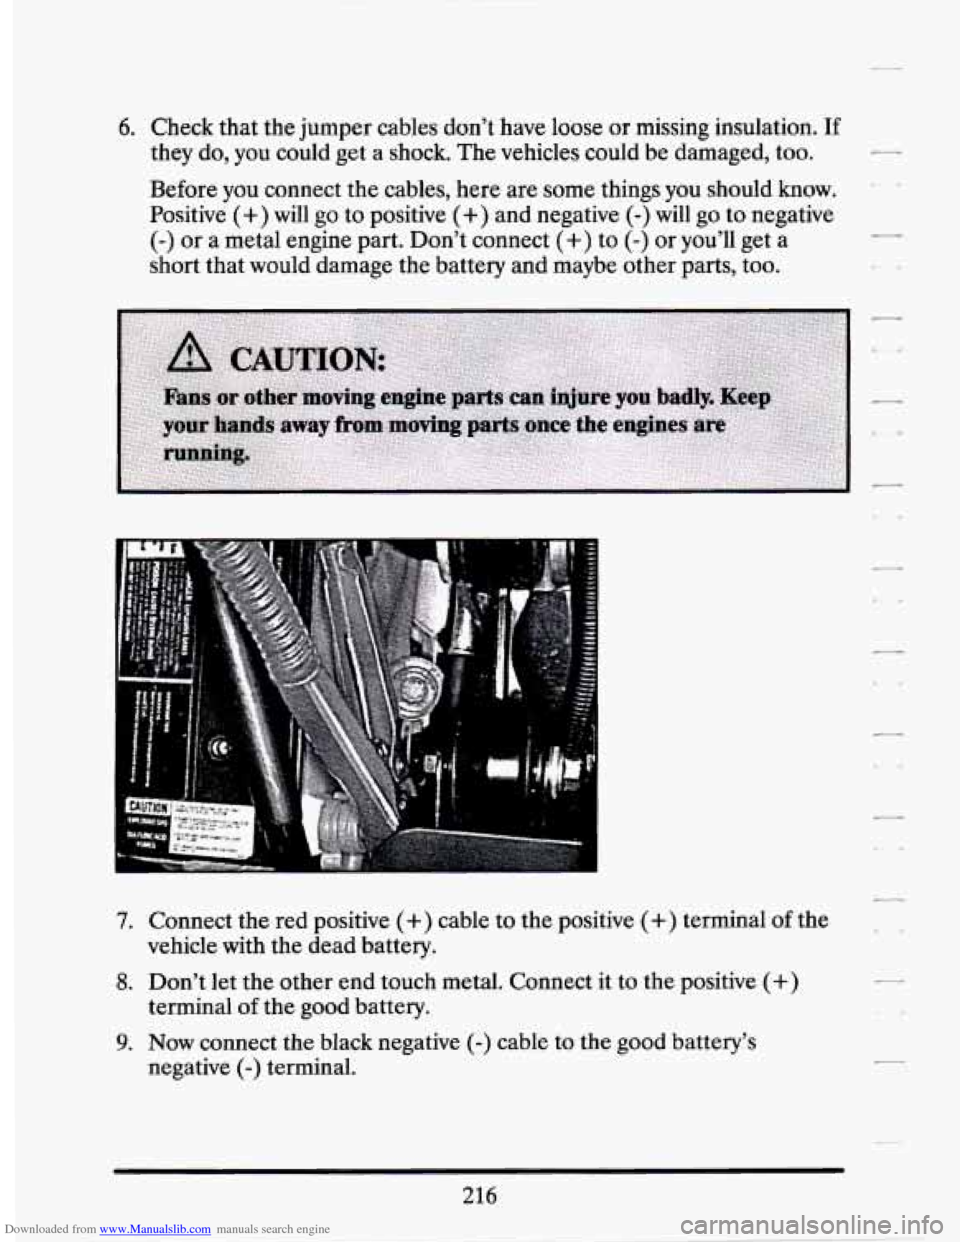 CADILLAC SEVILLE 1994 4.G Owners Manual Downloaded from www.Manualslib.com manuals search engine 6. Check that  the  jumper  cables  don’t  have  loose or missing  insulation. If 
they do, you could  get a  shock.  The vehicles  could  be